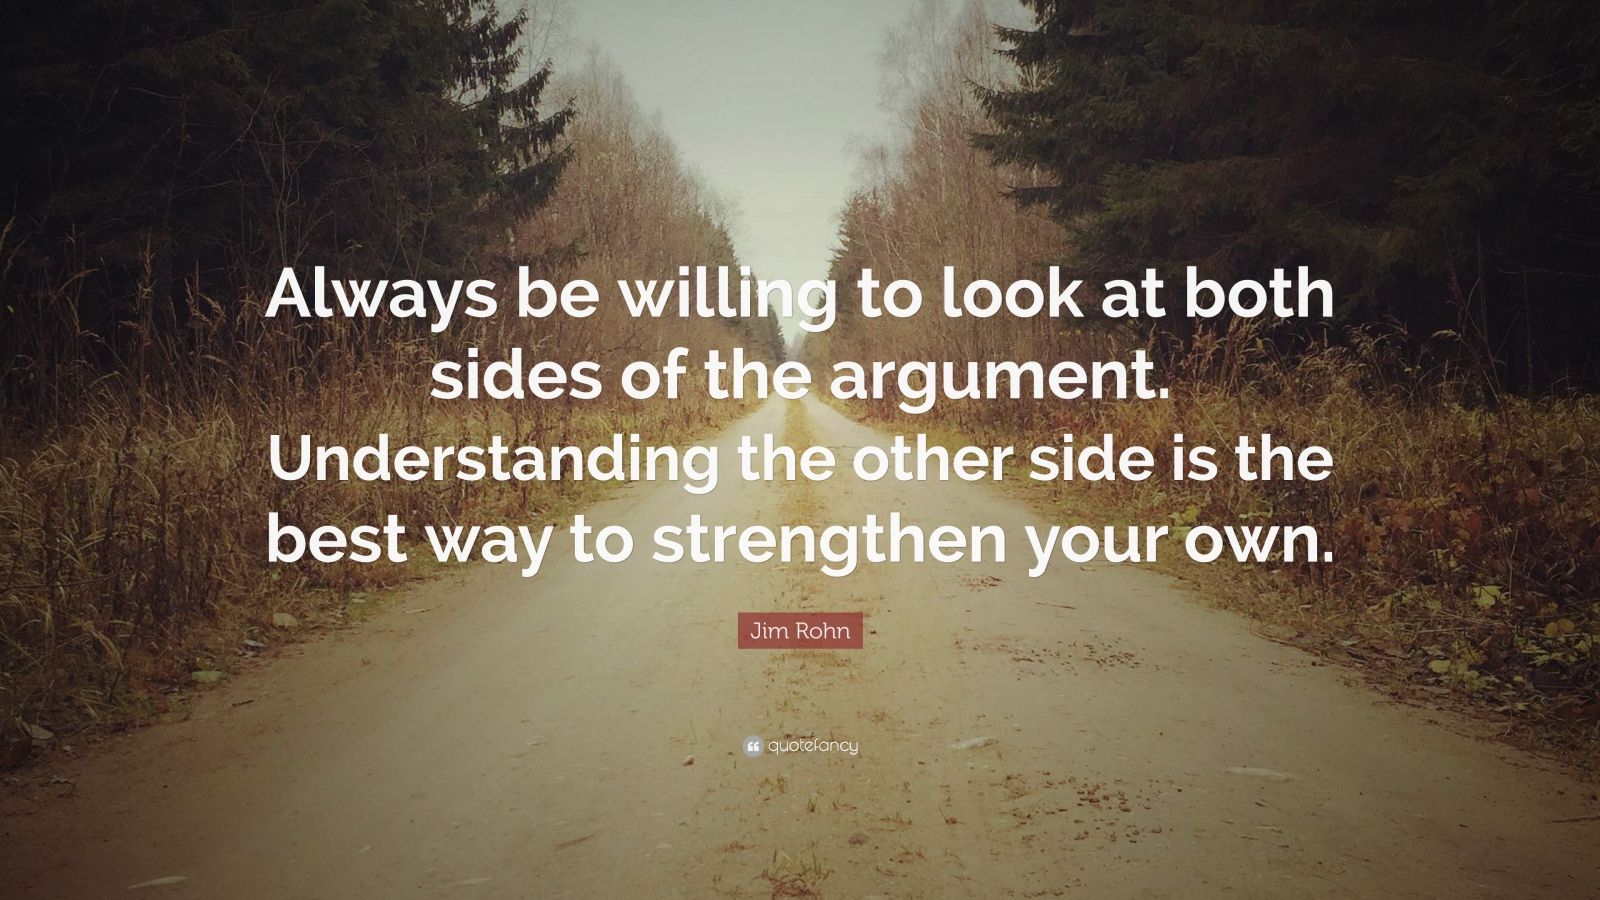 Jim Rohn Quote: “Always be willing to look at both sides of the